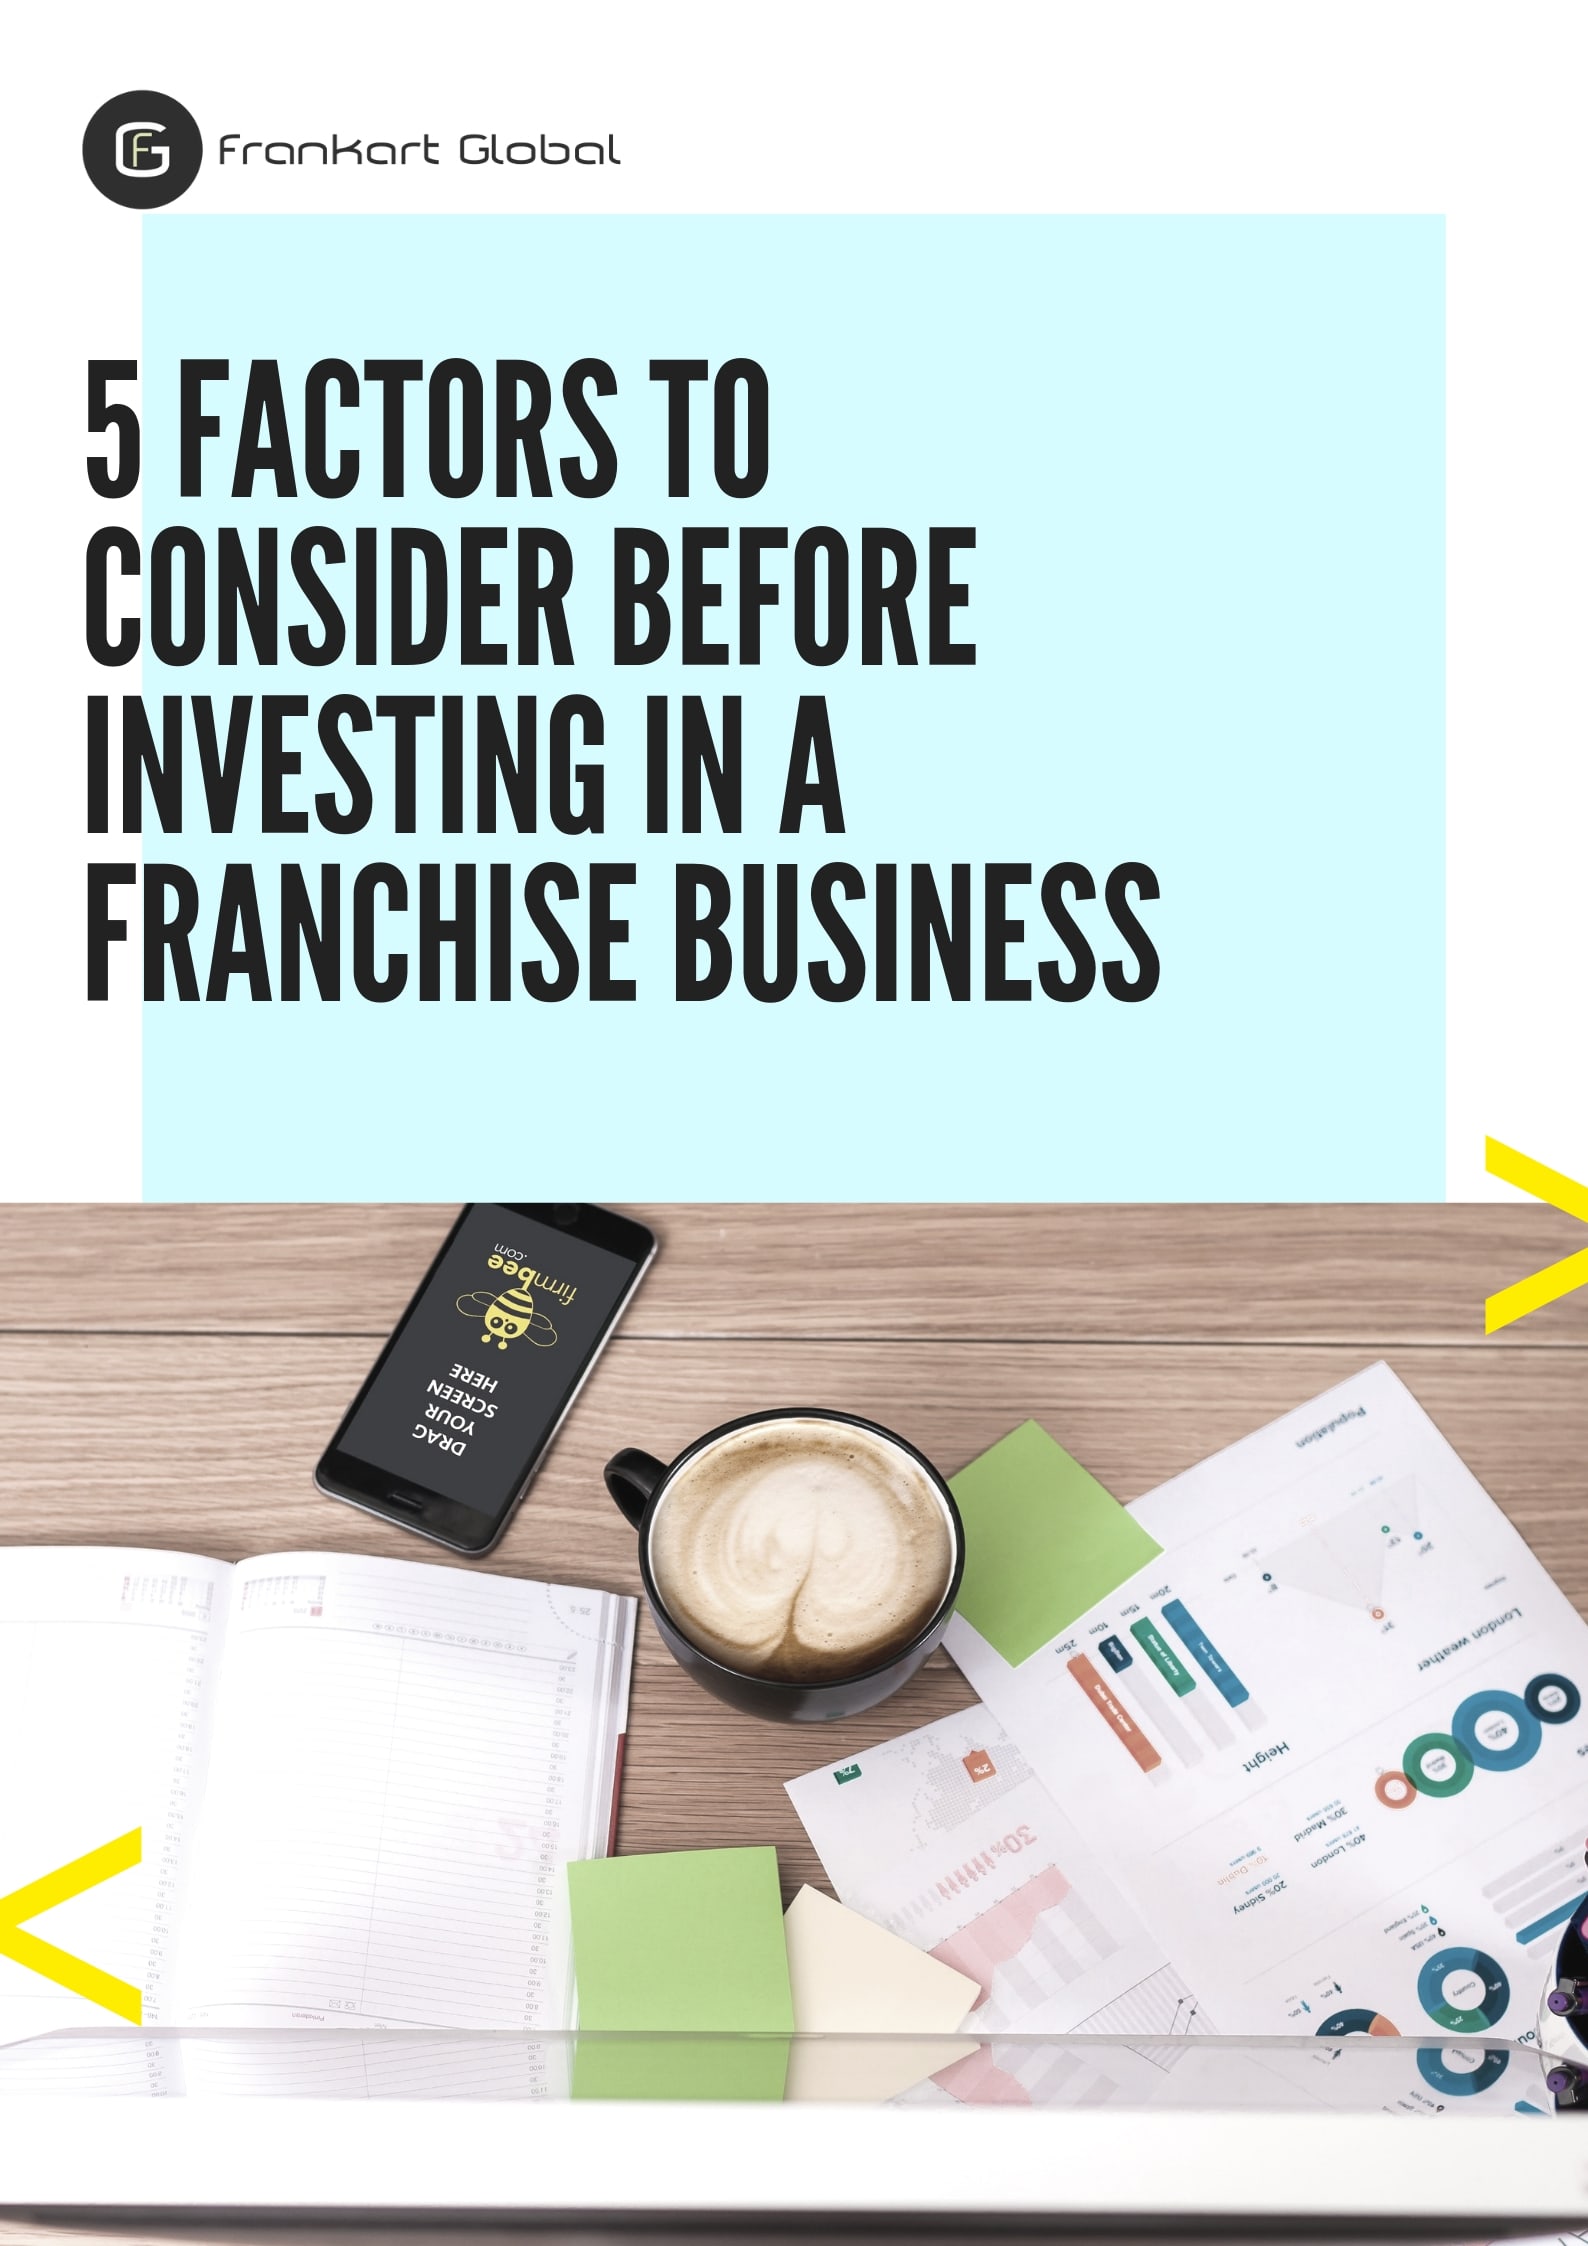 5 FACTORS TO CONSIDER BEFORE INVESTING IN A FRANCHISE BUSINESS